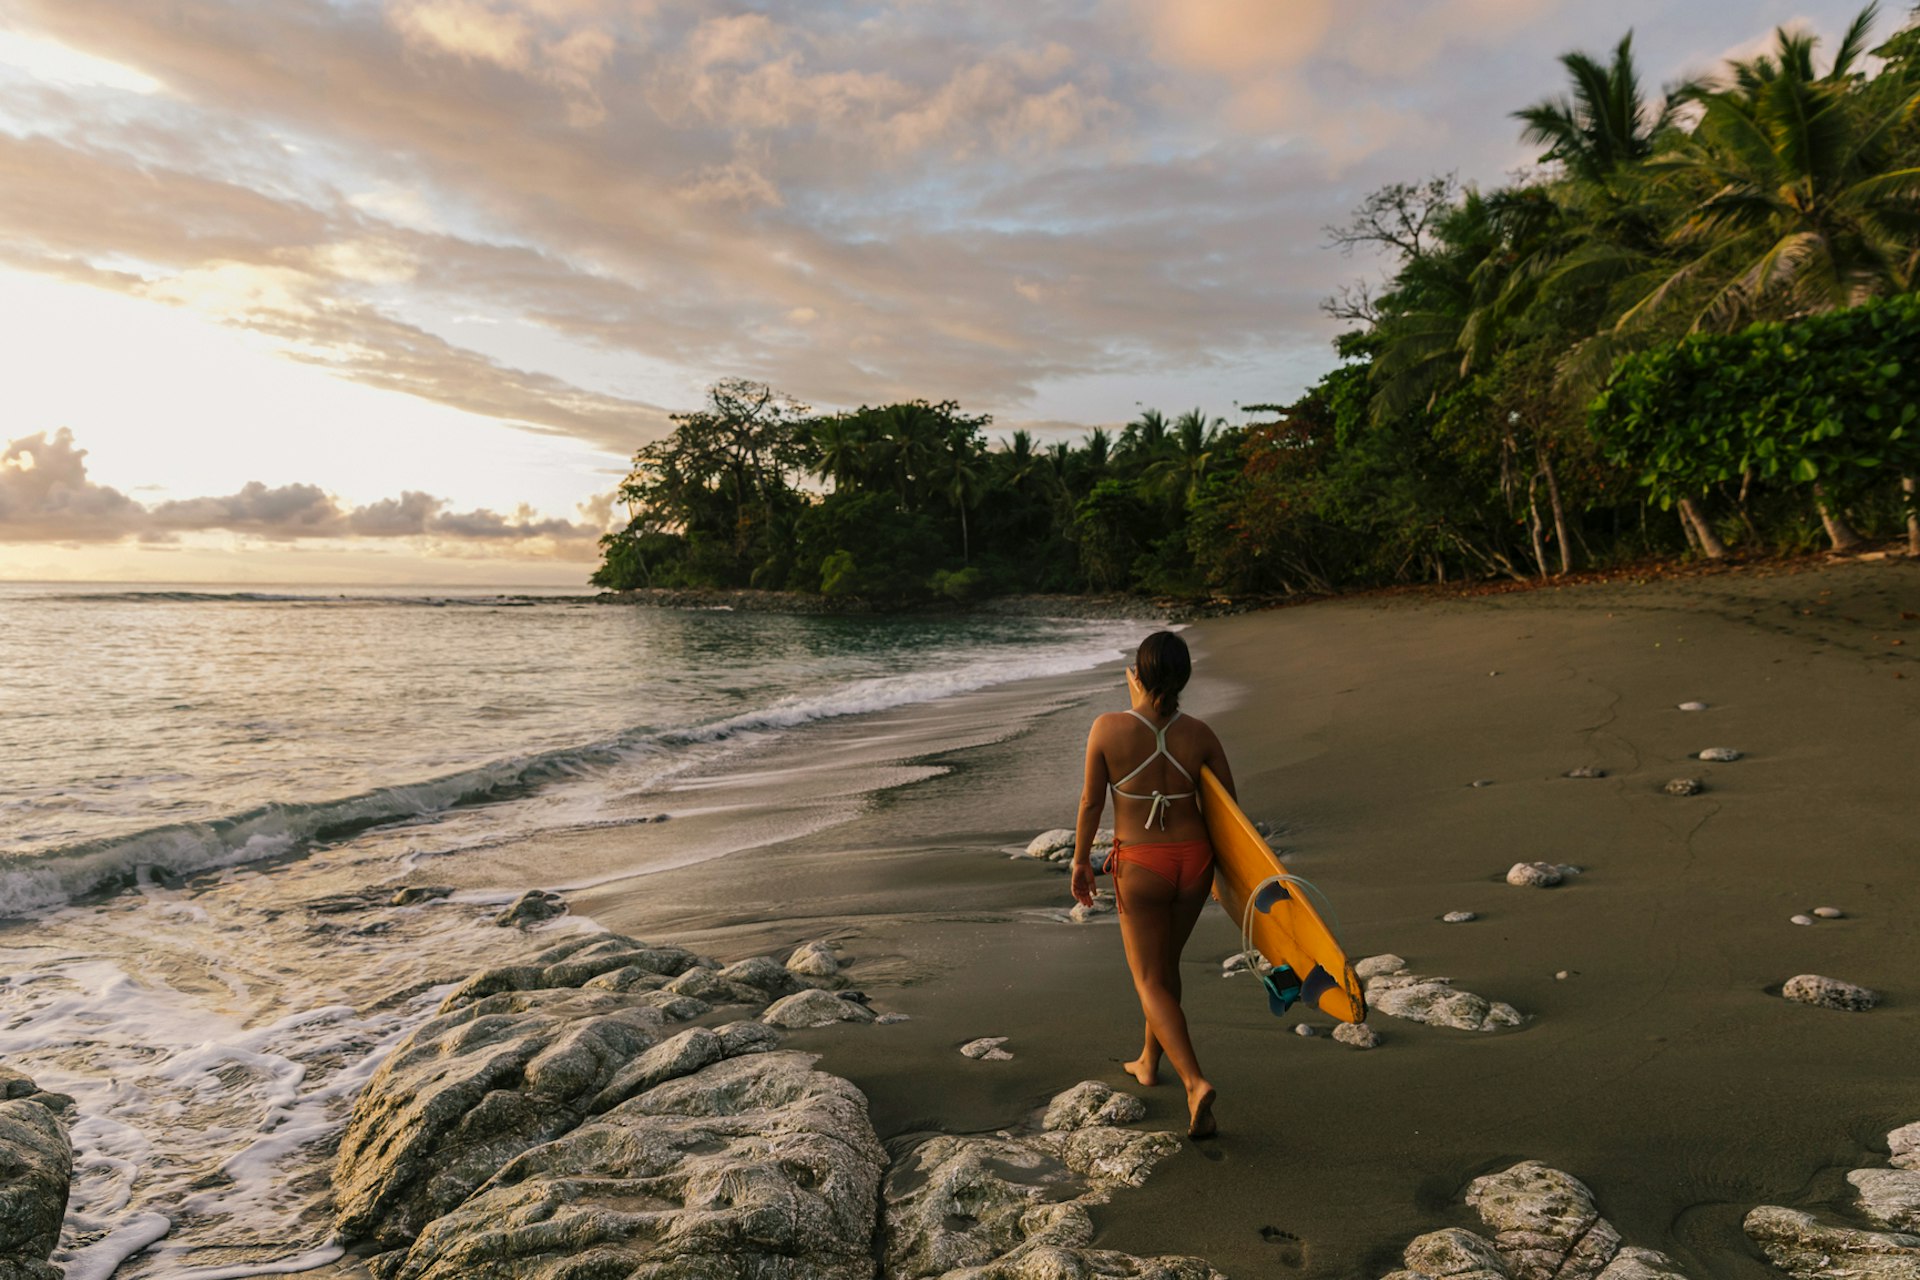 A woman walks across a beach in Costa Rica at sunset with a surfboard in her hand